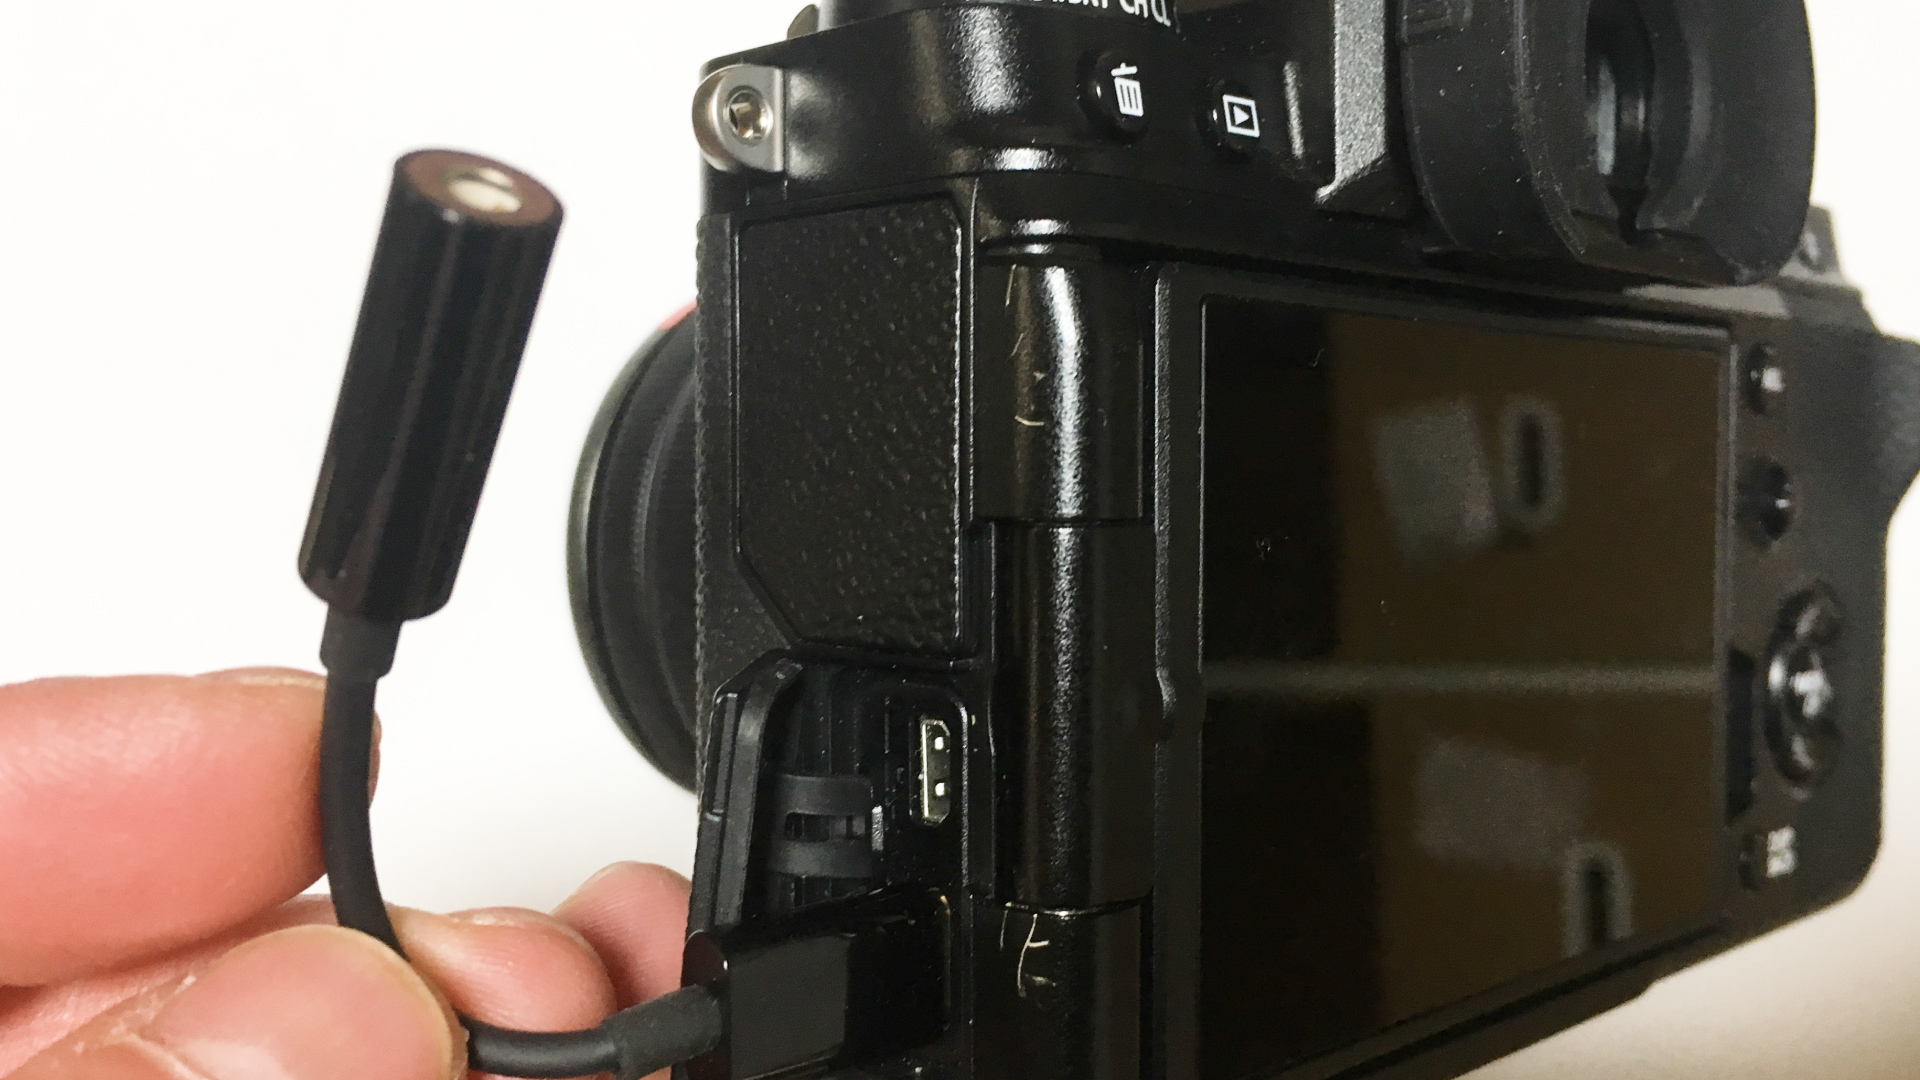 FUJIFILM X-T4 Hands-on Review - The Good Has Just Become Much